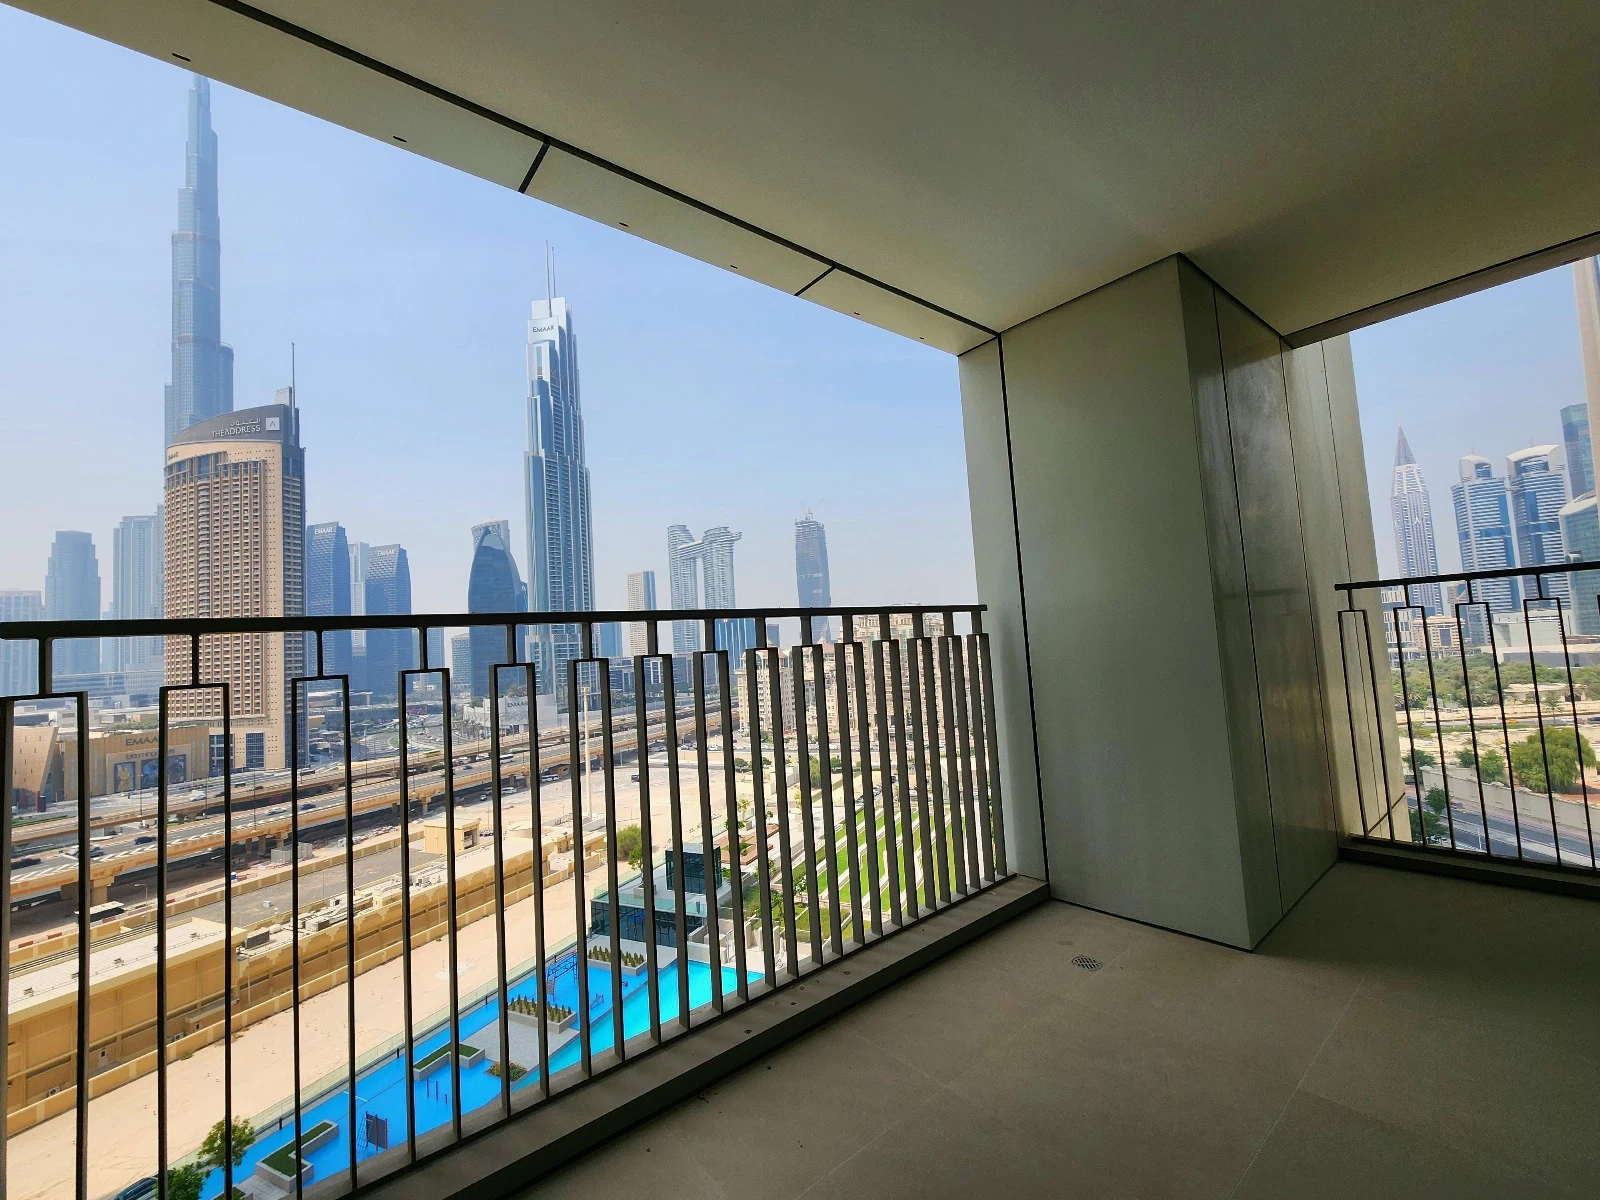 Exterior view of Downtown Views II, a modern apartment complex in Dubai, featuring sleek architectural design with glass facades, and an interior shot of a three-bedroom apartment with contemporary decor, large windows, and luxurious finishes.